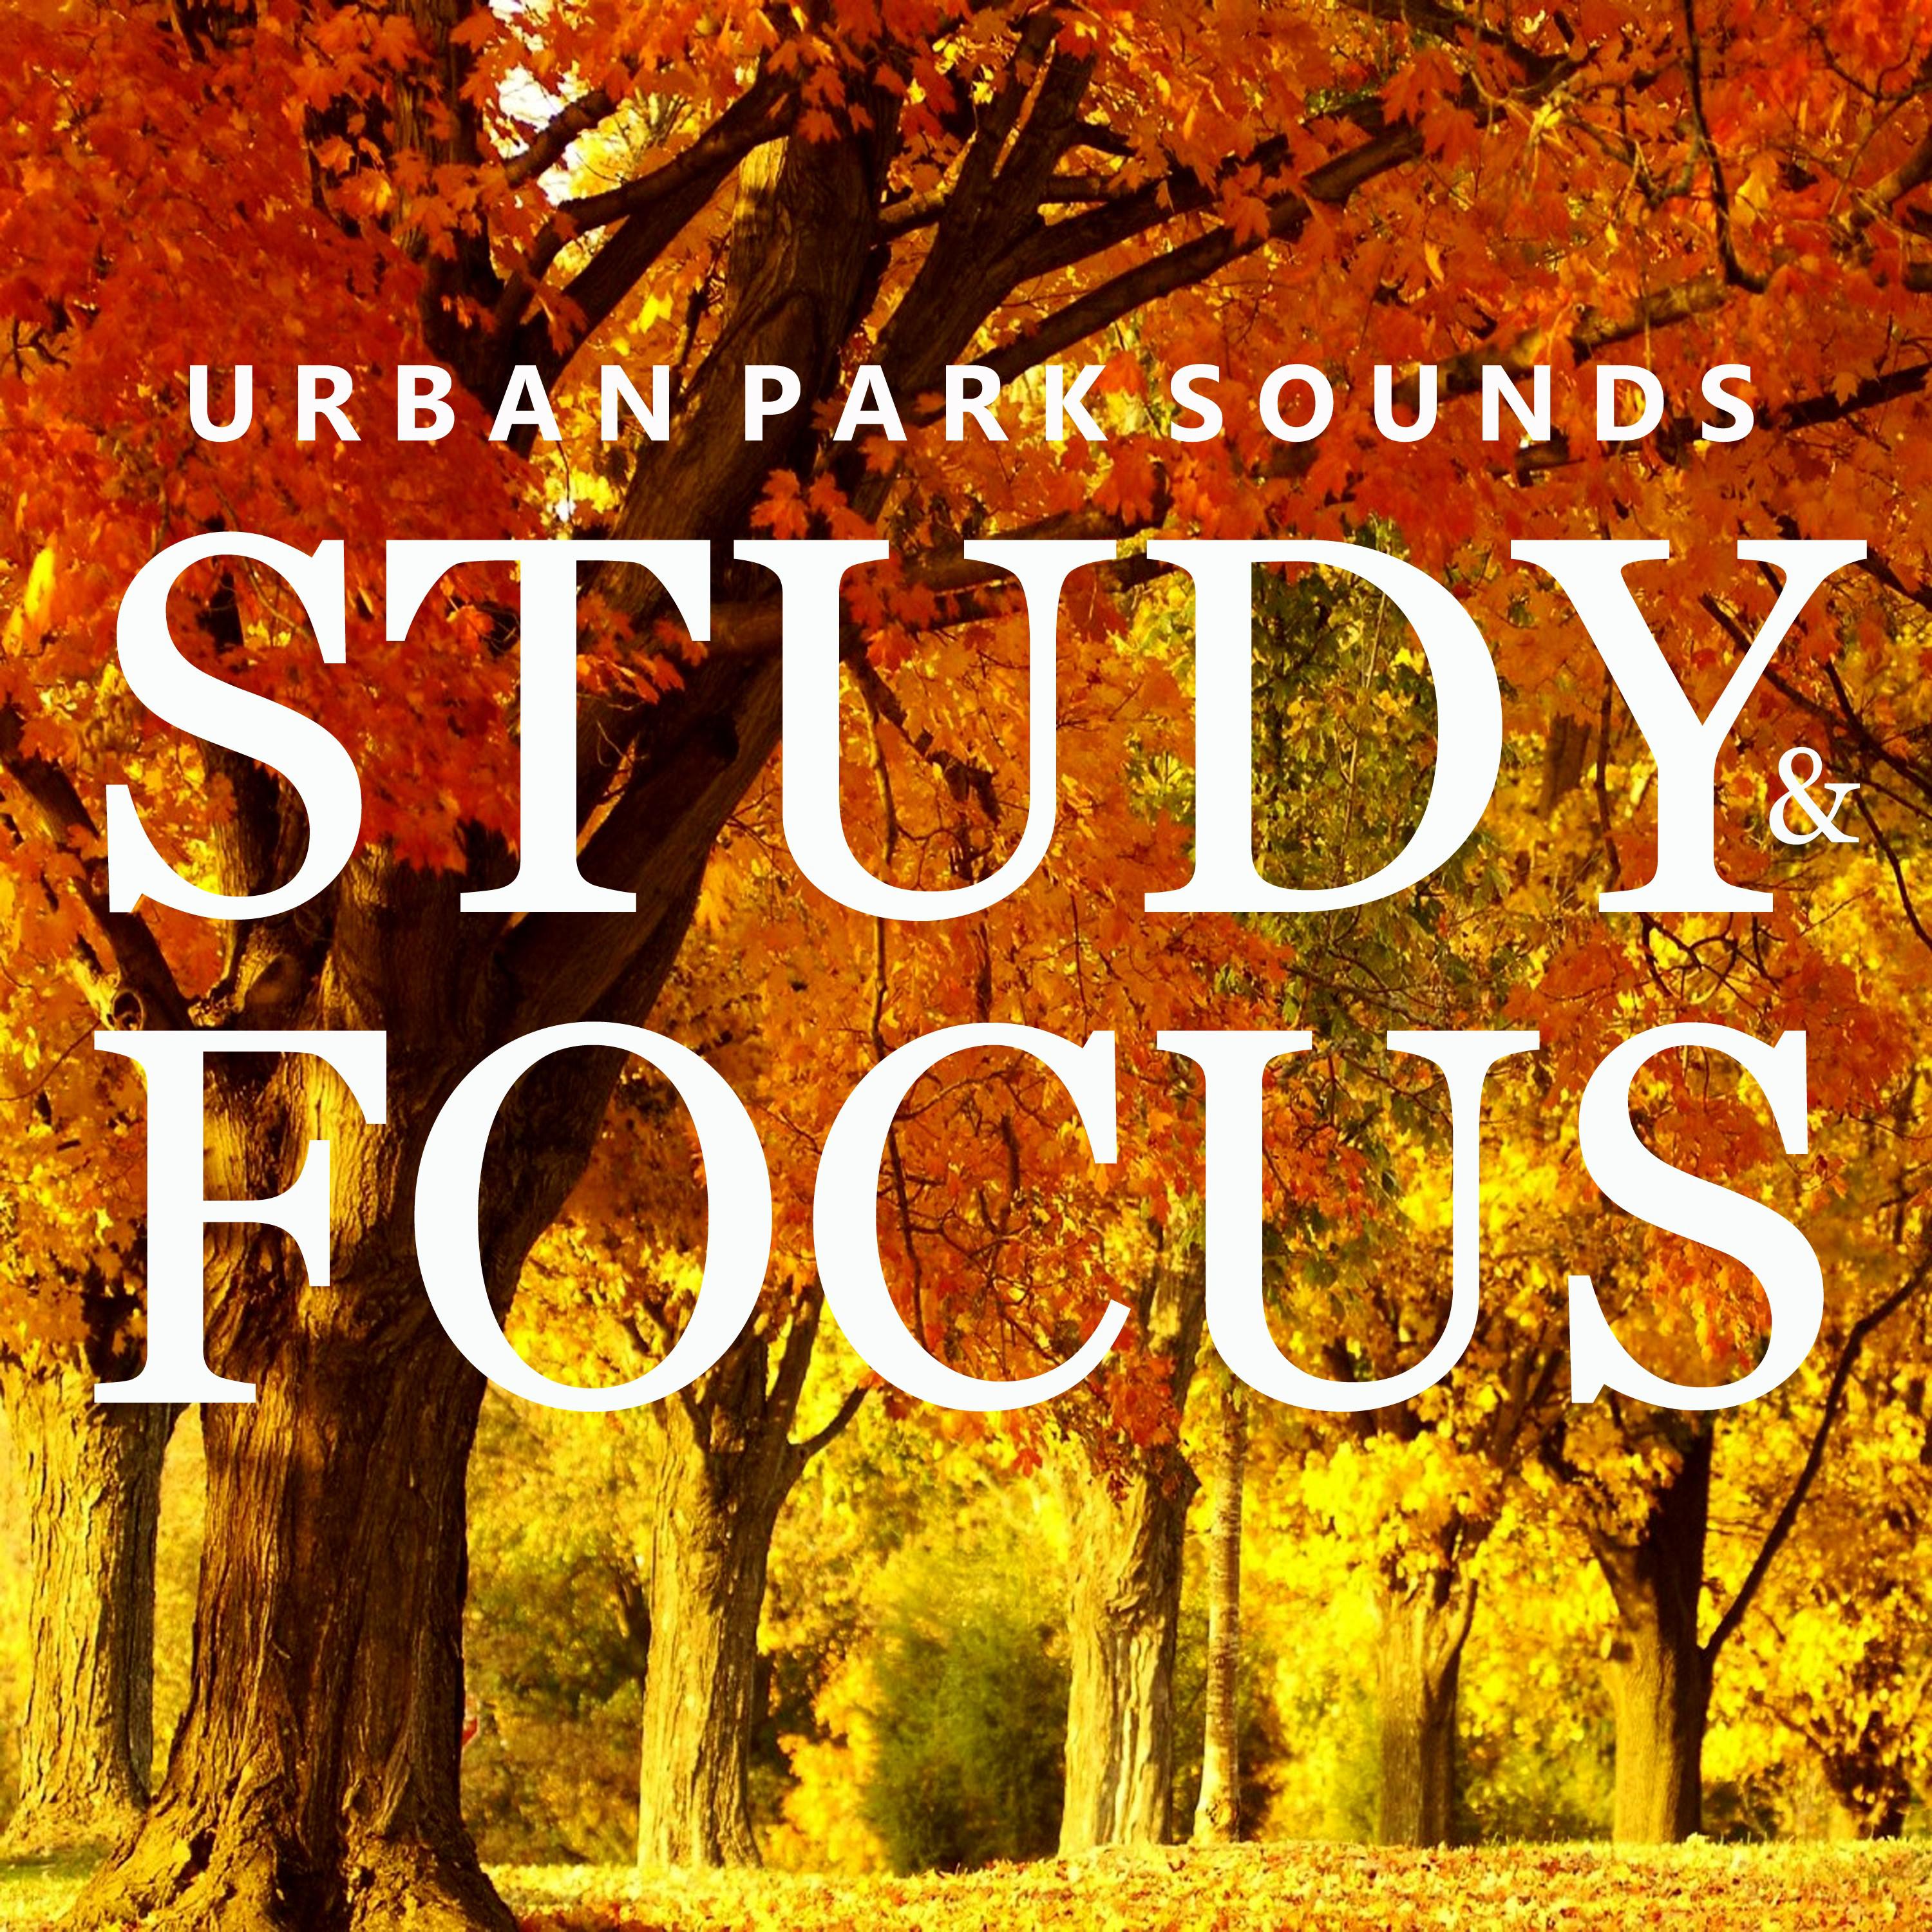 Urban Park Sounds for Studying, Pt. 33